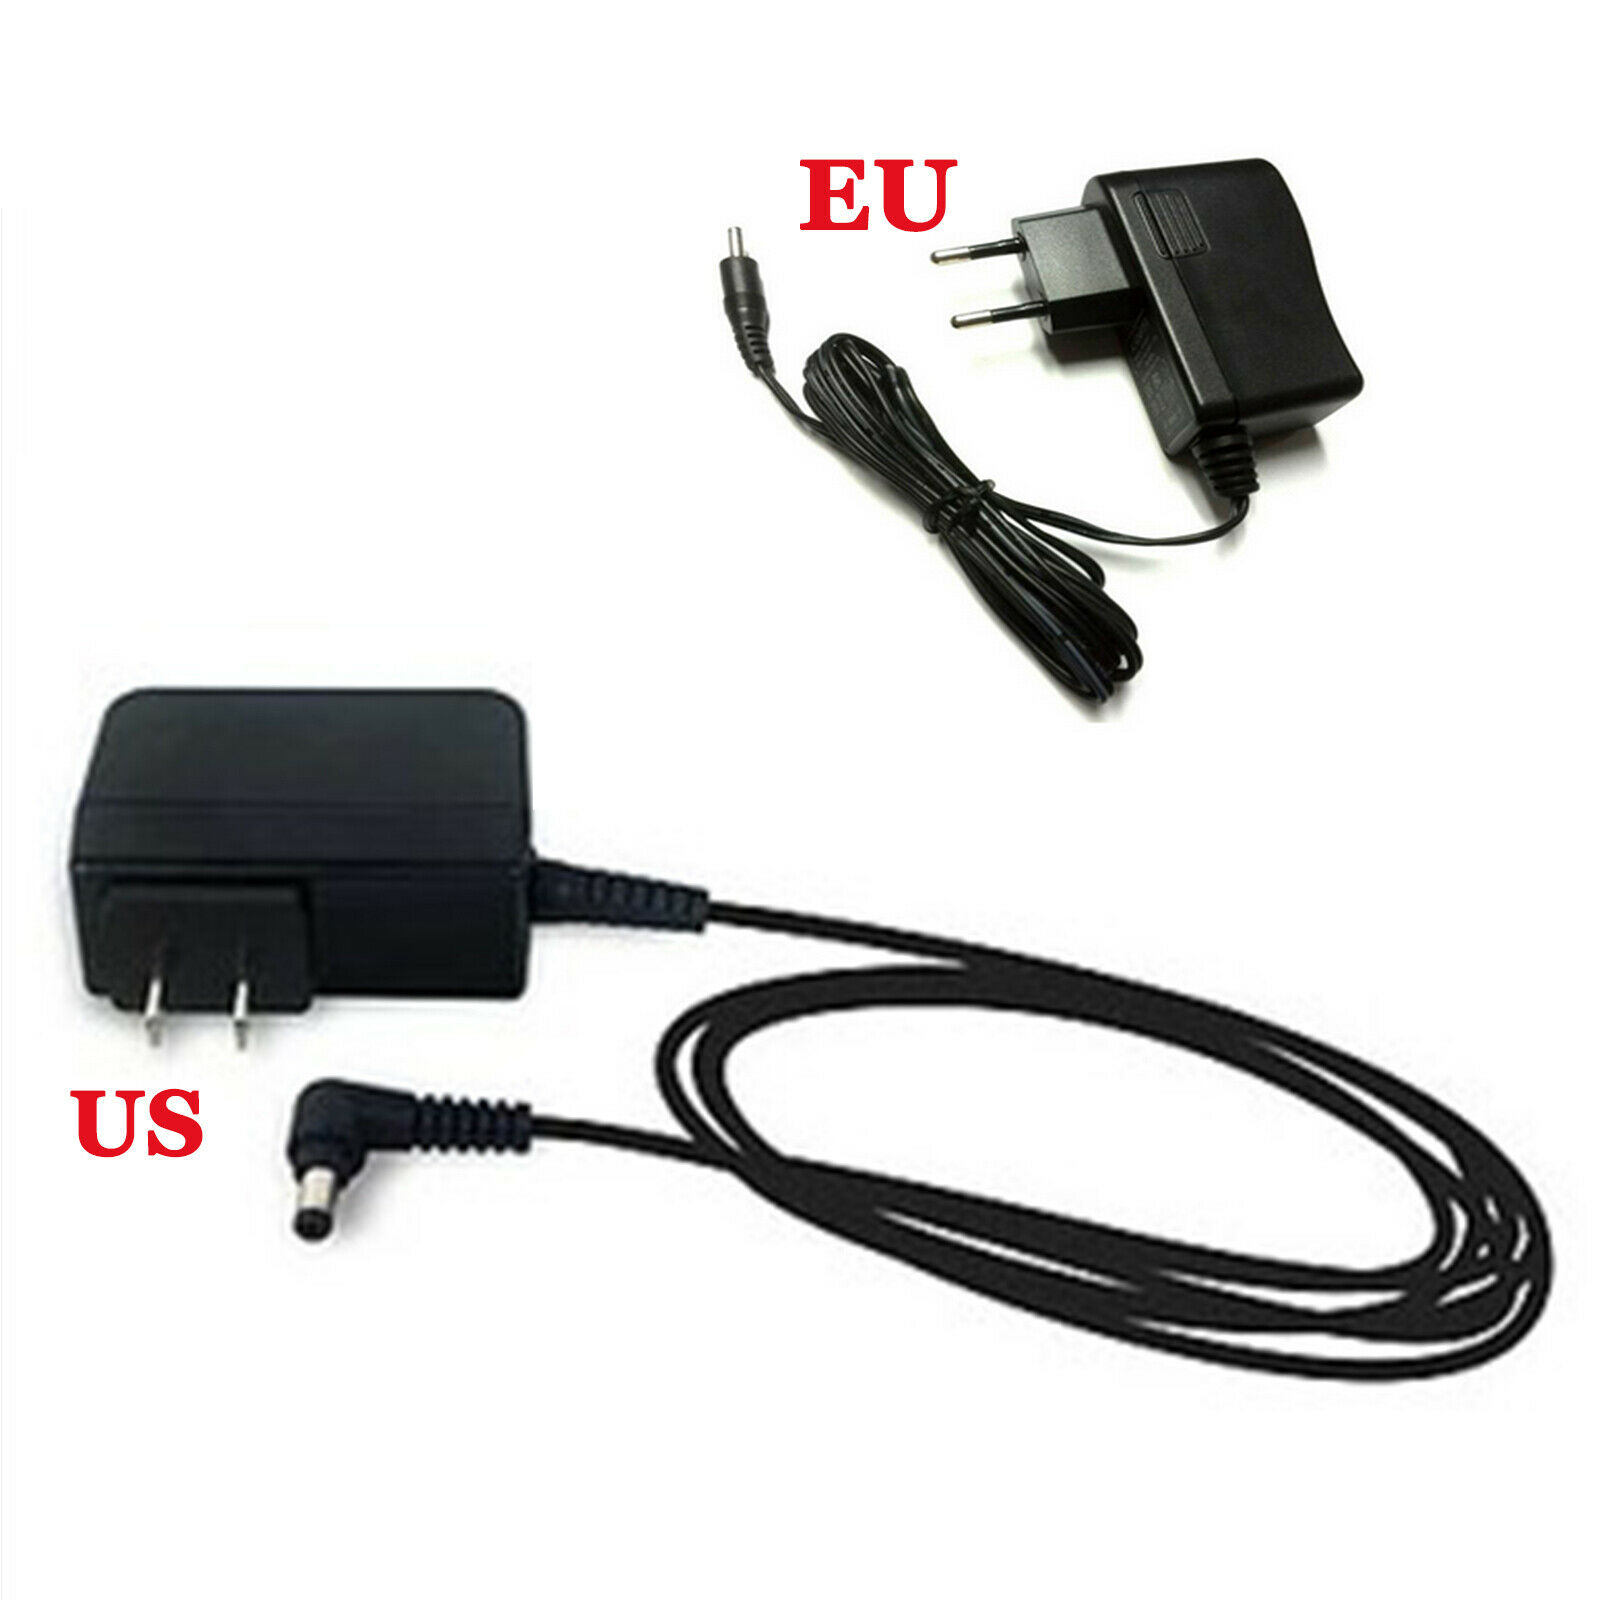 US or EU Power Charger for iRobot Braava 380t 381 320 MINT 5200C 4200 Vacuum Cleaner Product Description US Power Charg